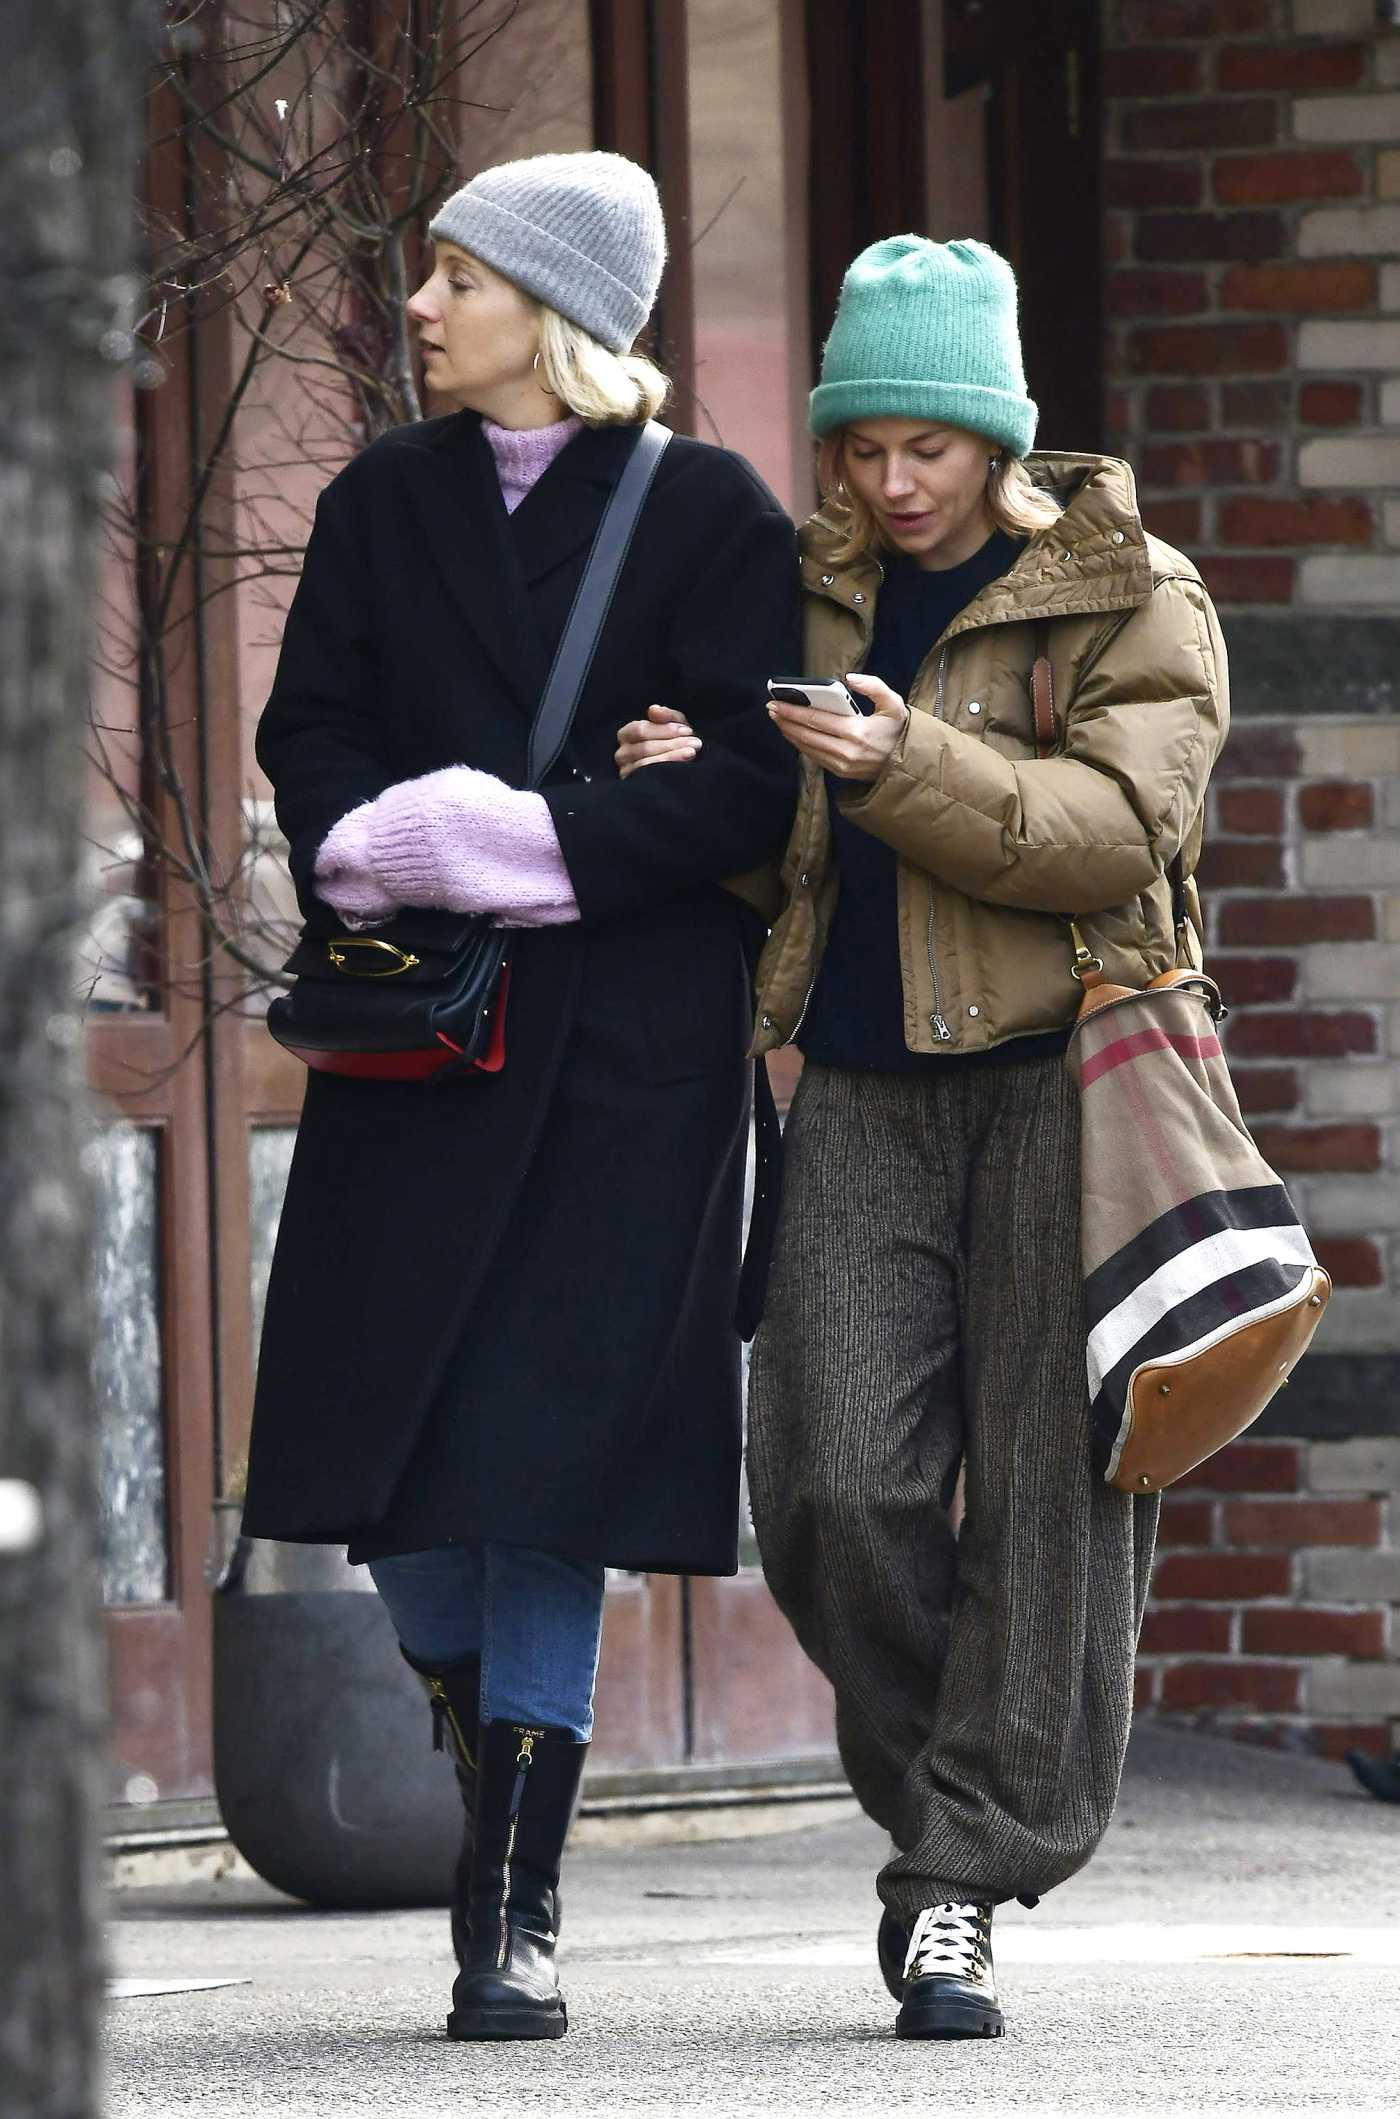 Sienna Miller in a Green Beanie Hat Was Seen Out with Savannah Miller in New York 02/06/2022